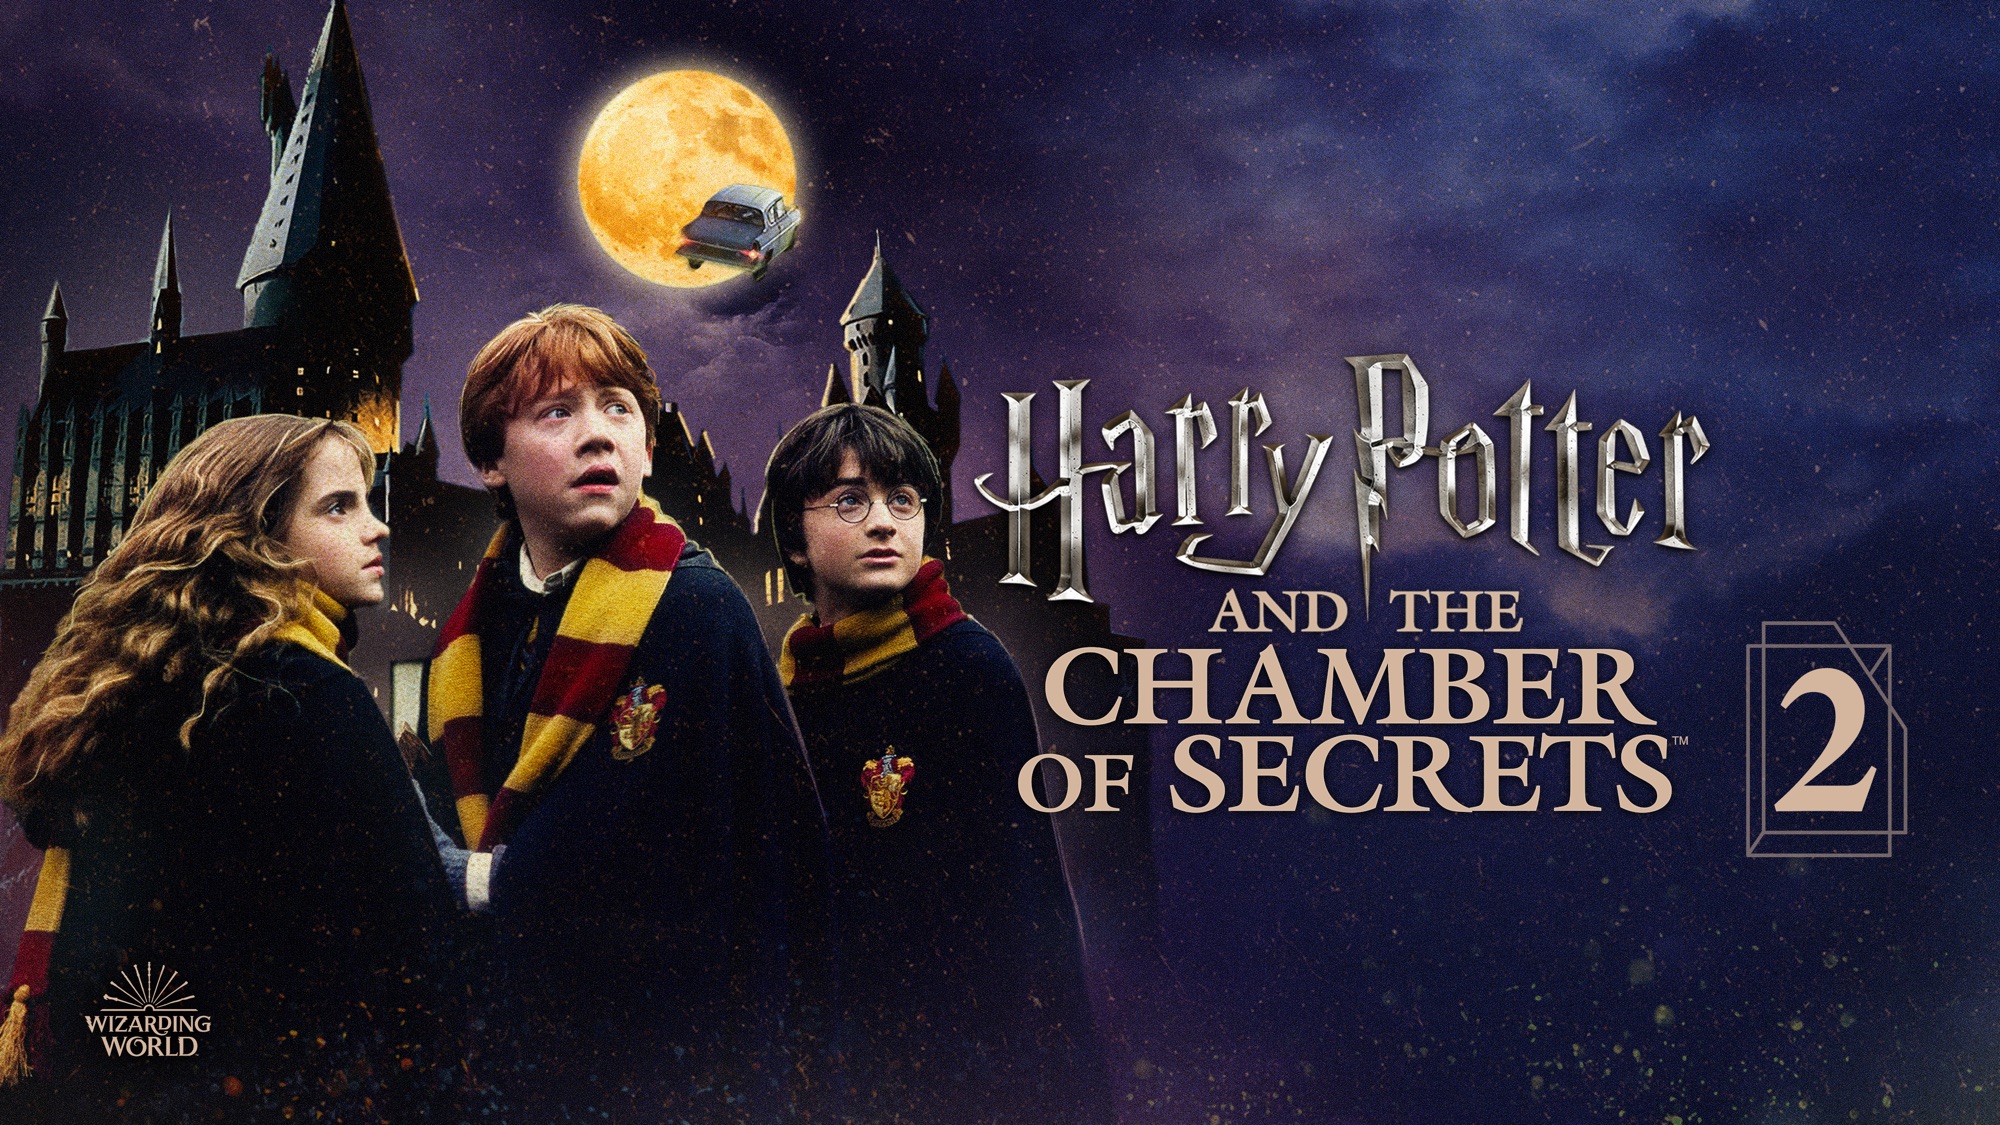 Free download wallpaper Harry Potter, Emma Watson, Daniel Radcliffe, Movie, Hermione Granger, Ron Weasley, Rupert Grint, Harry Potter And The Chamber Of Secrets on your PC desktop